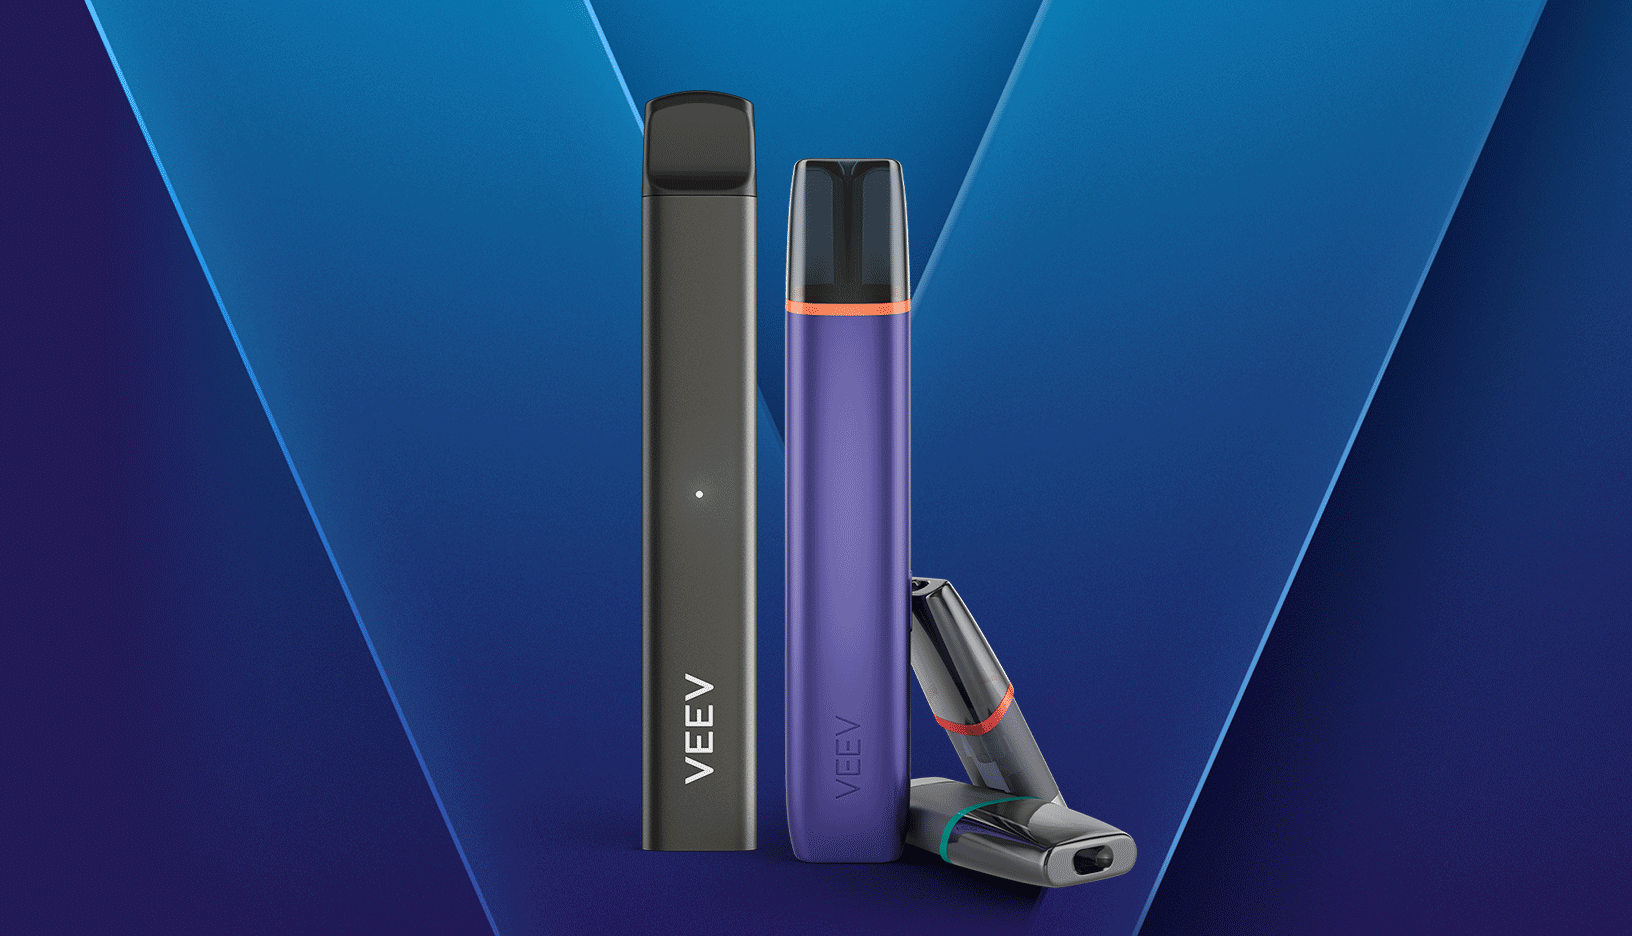 VEEV vaping devices in 5 colors on blue background